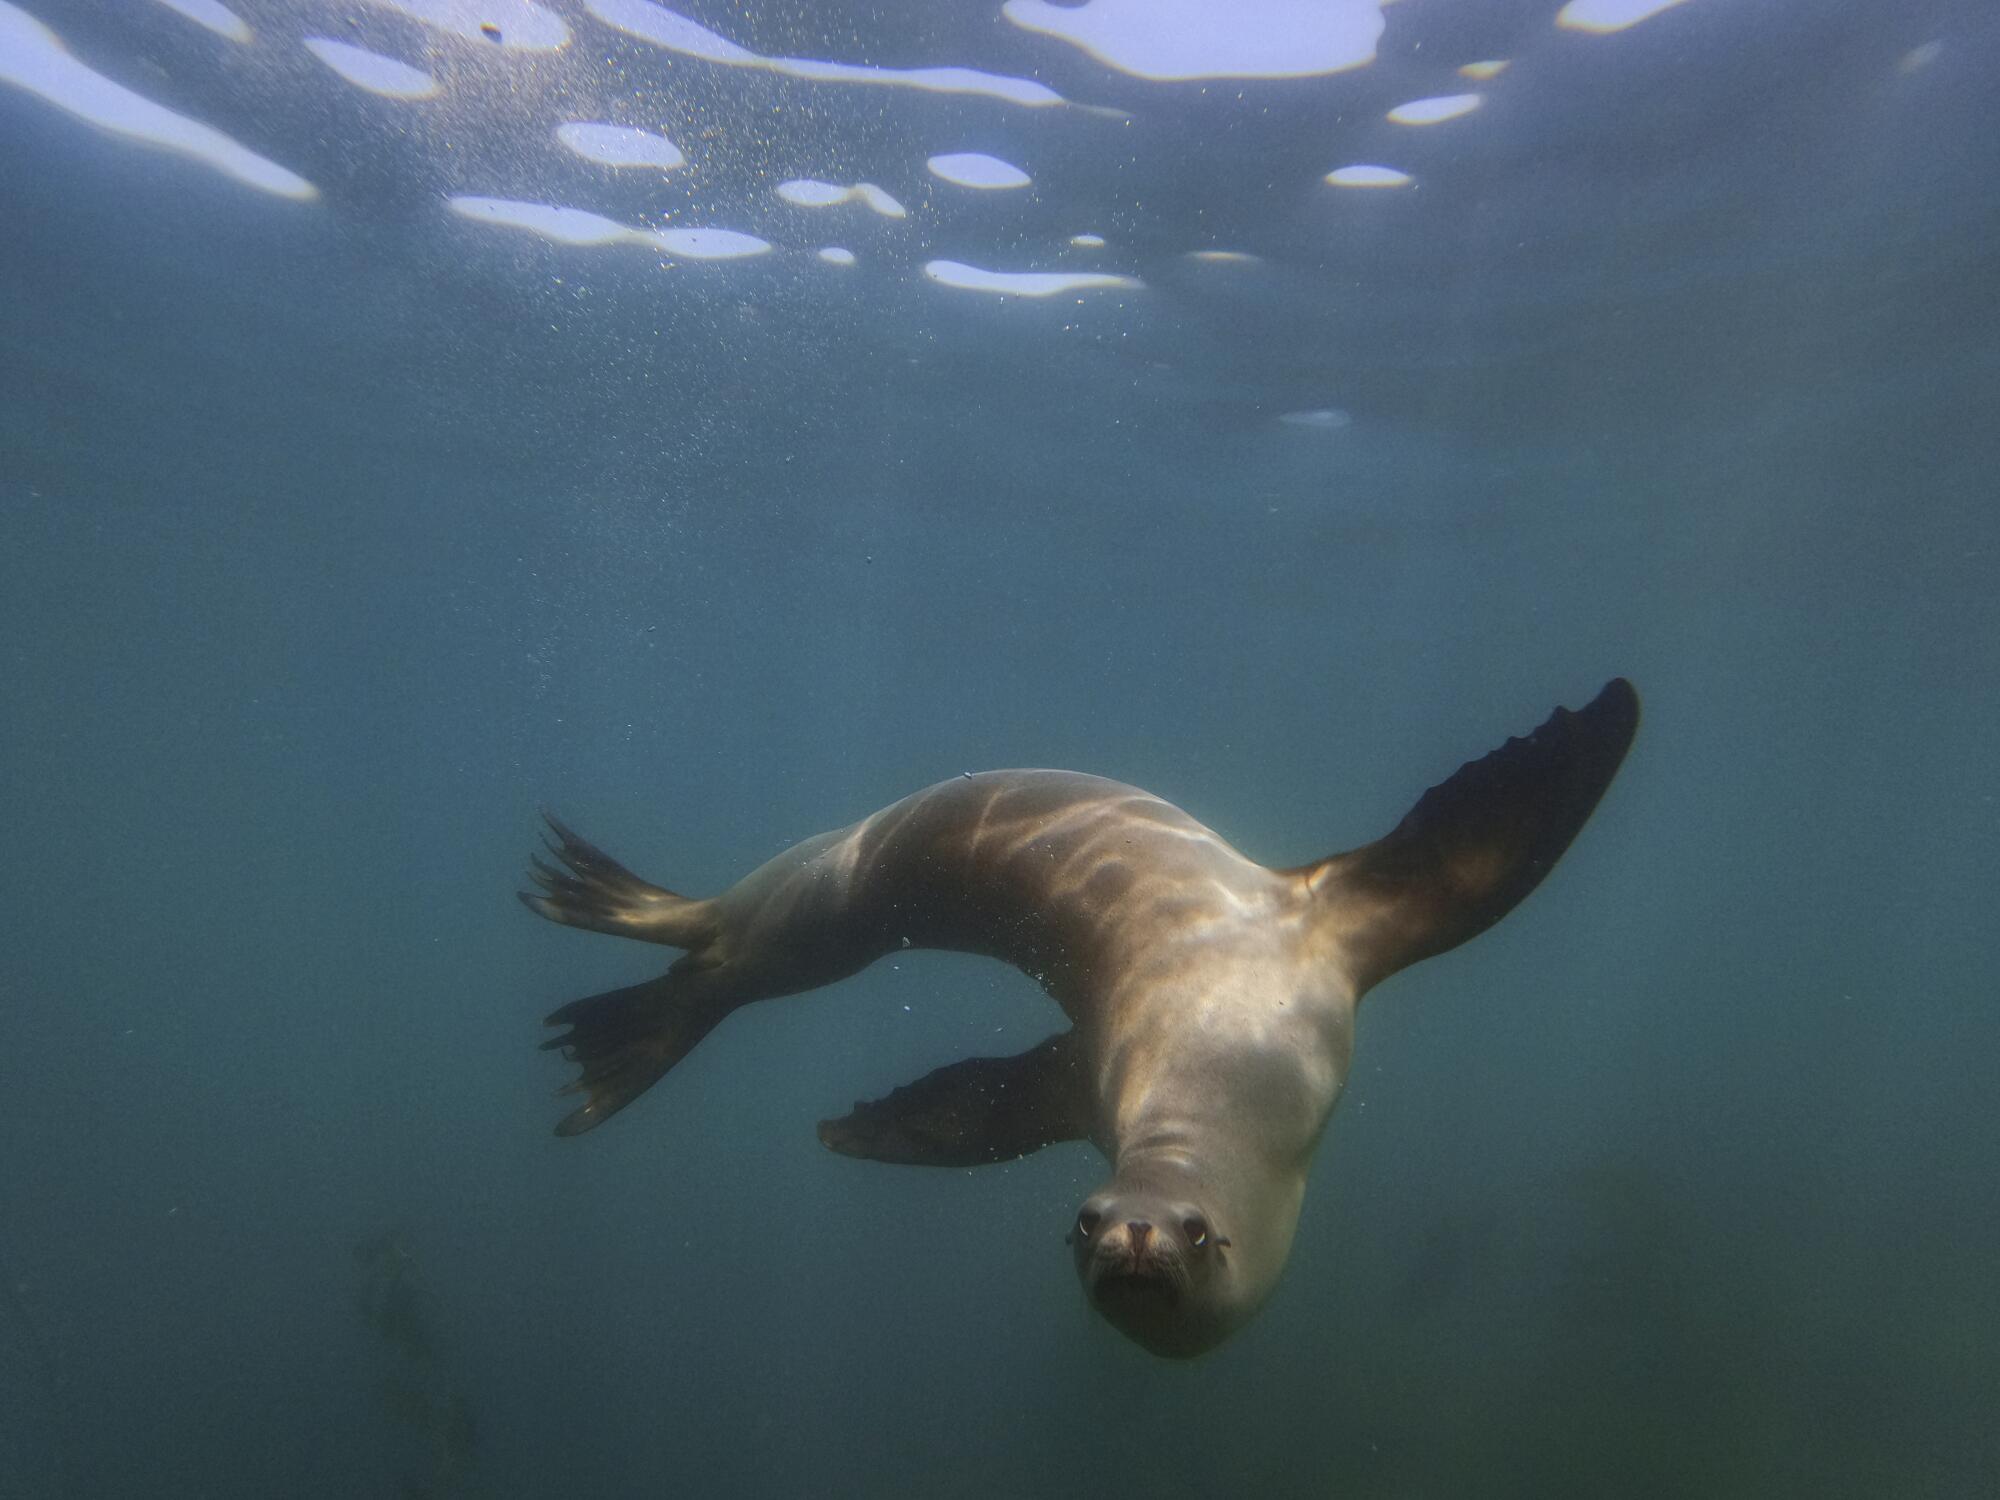 A sea lion swims in La Jolla's Cove which is inside a marine protected area.